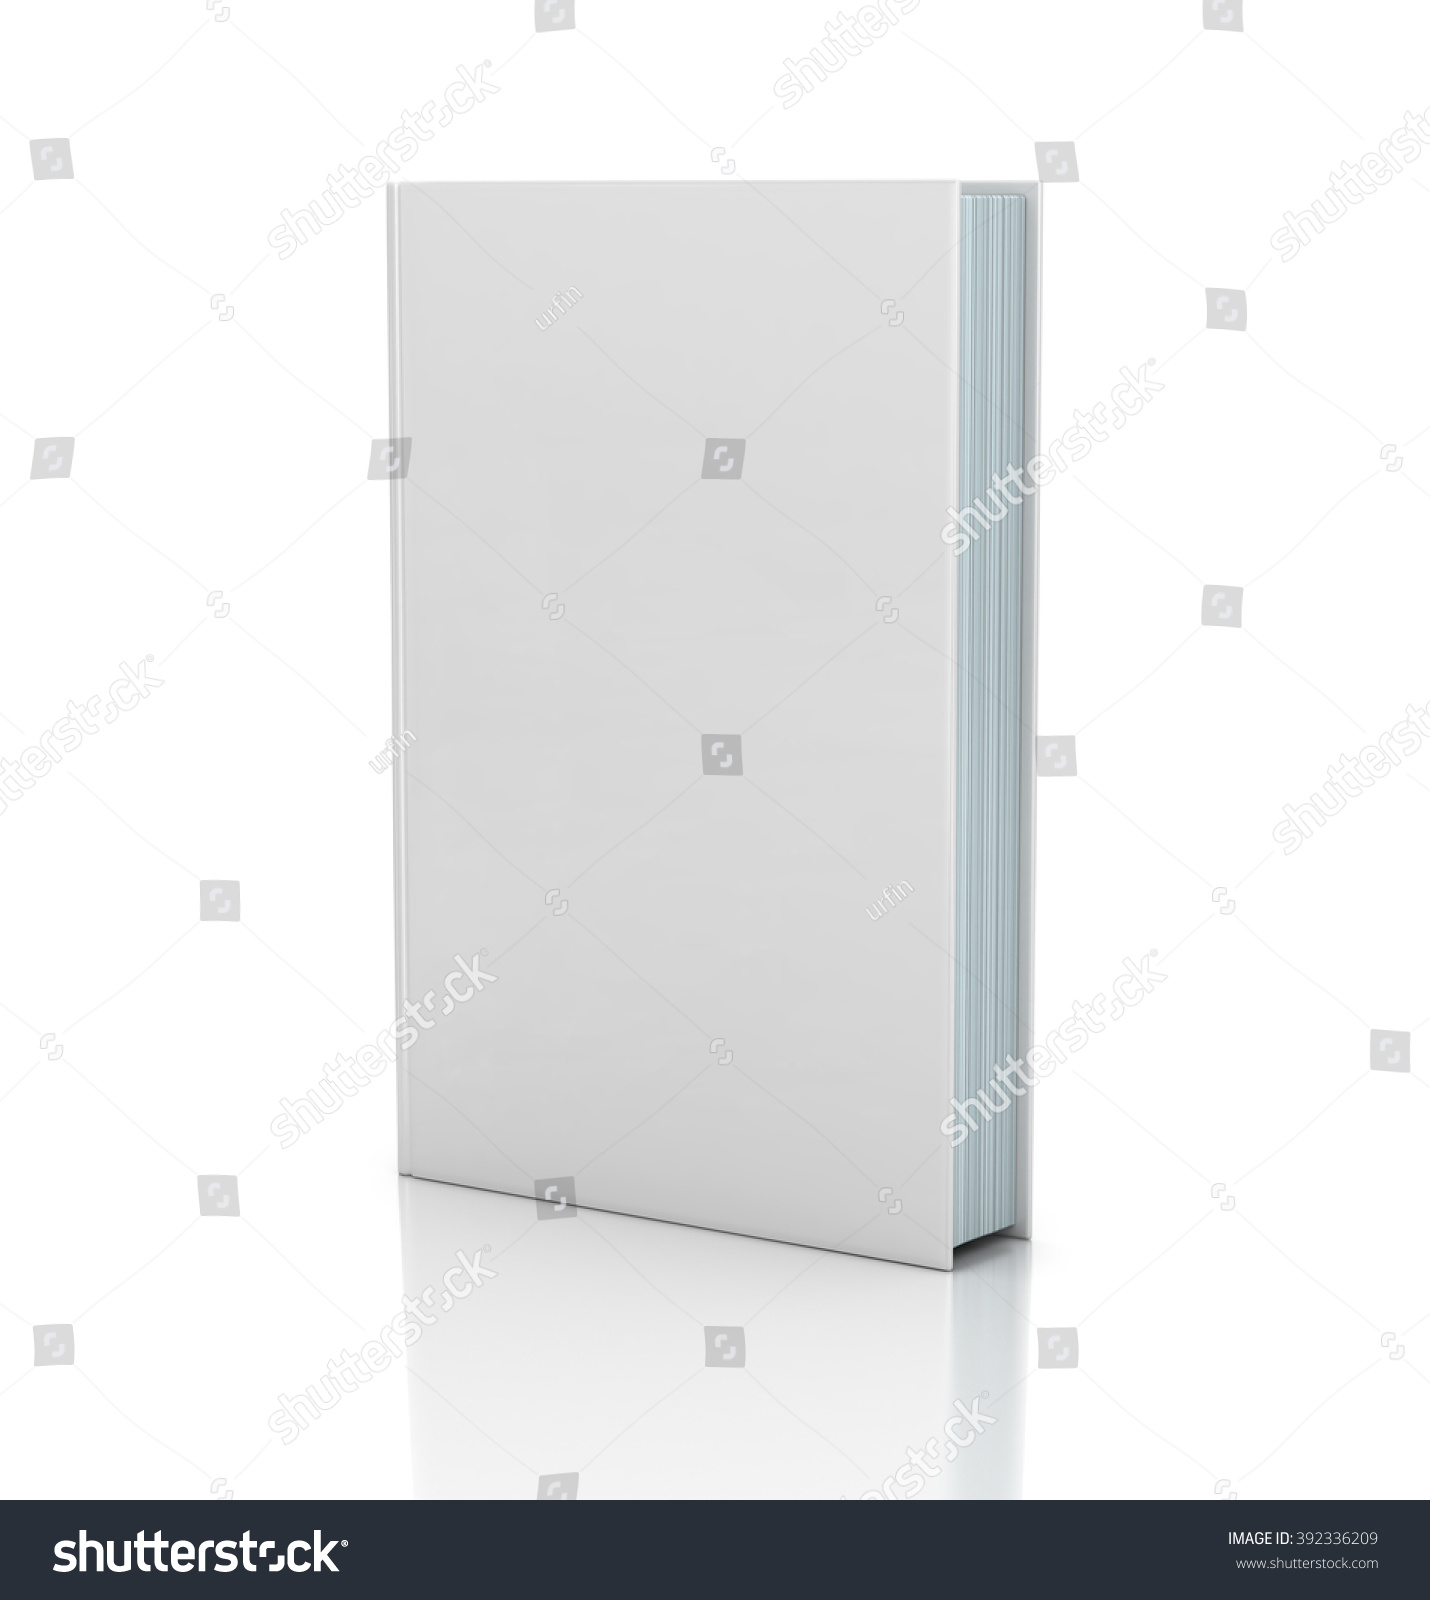 Blank Book Cover Over White Background Stock Photo 392336209 : Shutterstock